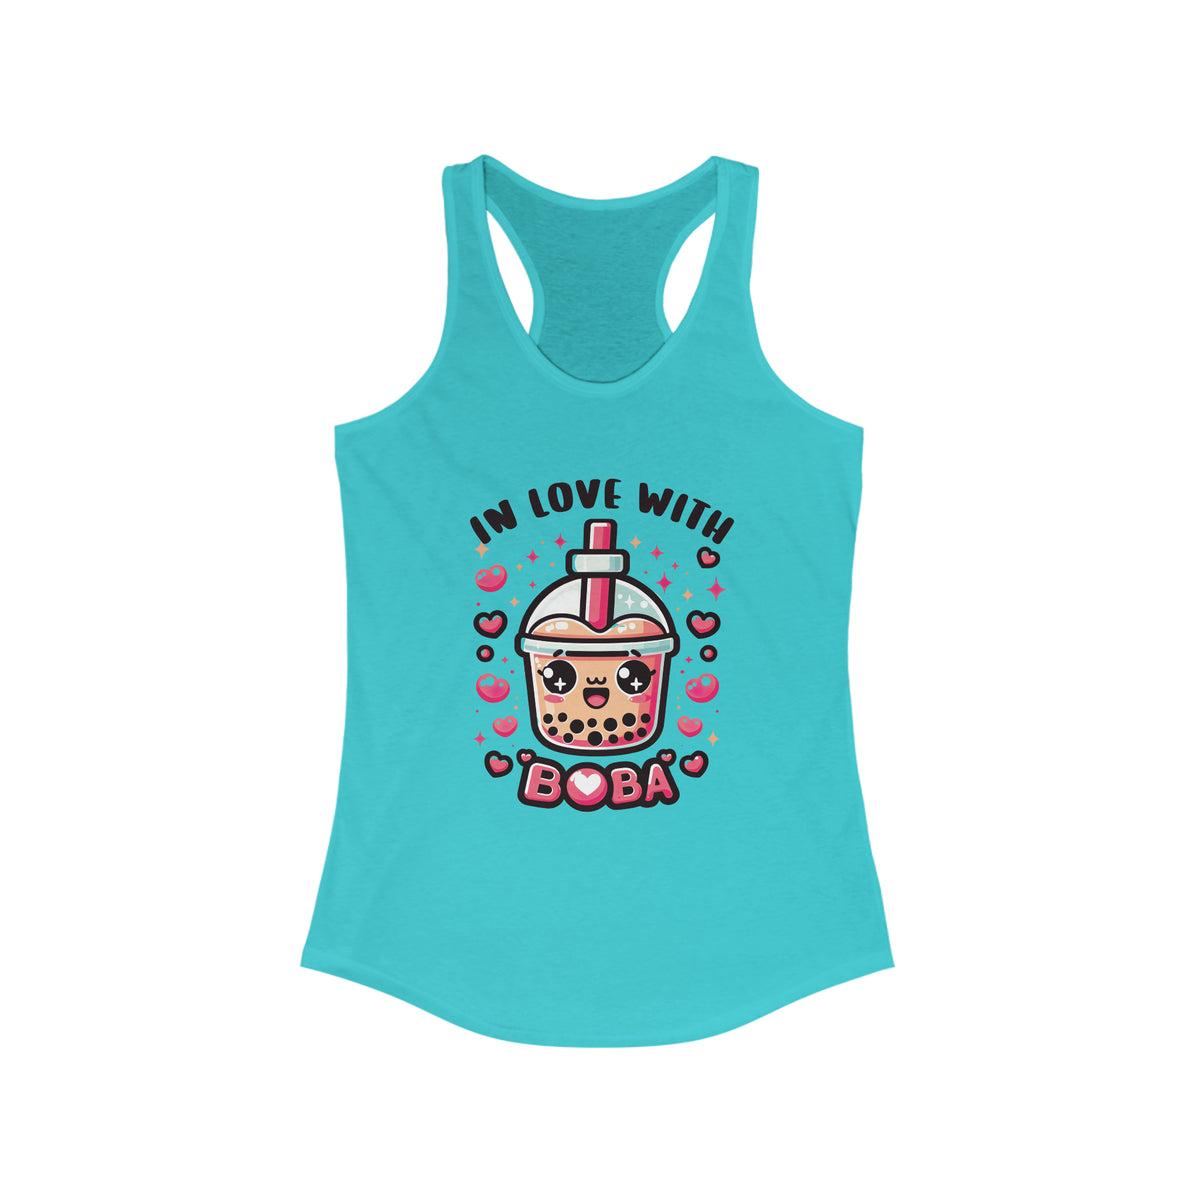 In Love With Boba Tea Lover Kawaii Shirt |  Cute Kawaii Valentine's Day Gift for Her | Women's Slim Fit Racerback Tank Top